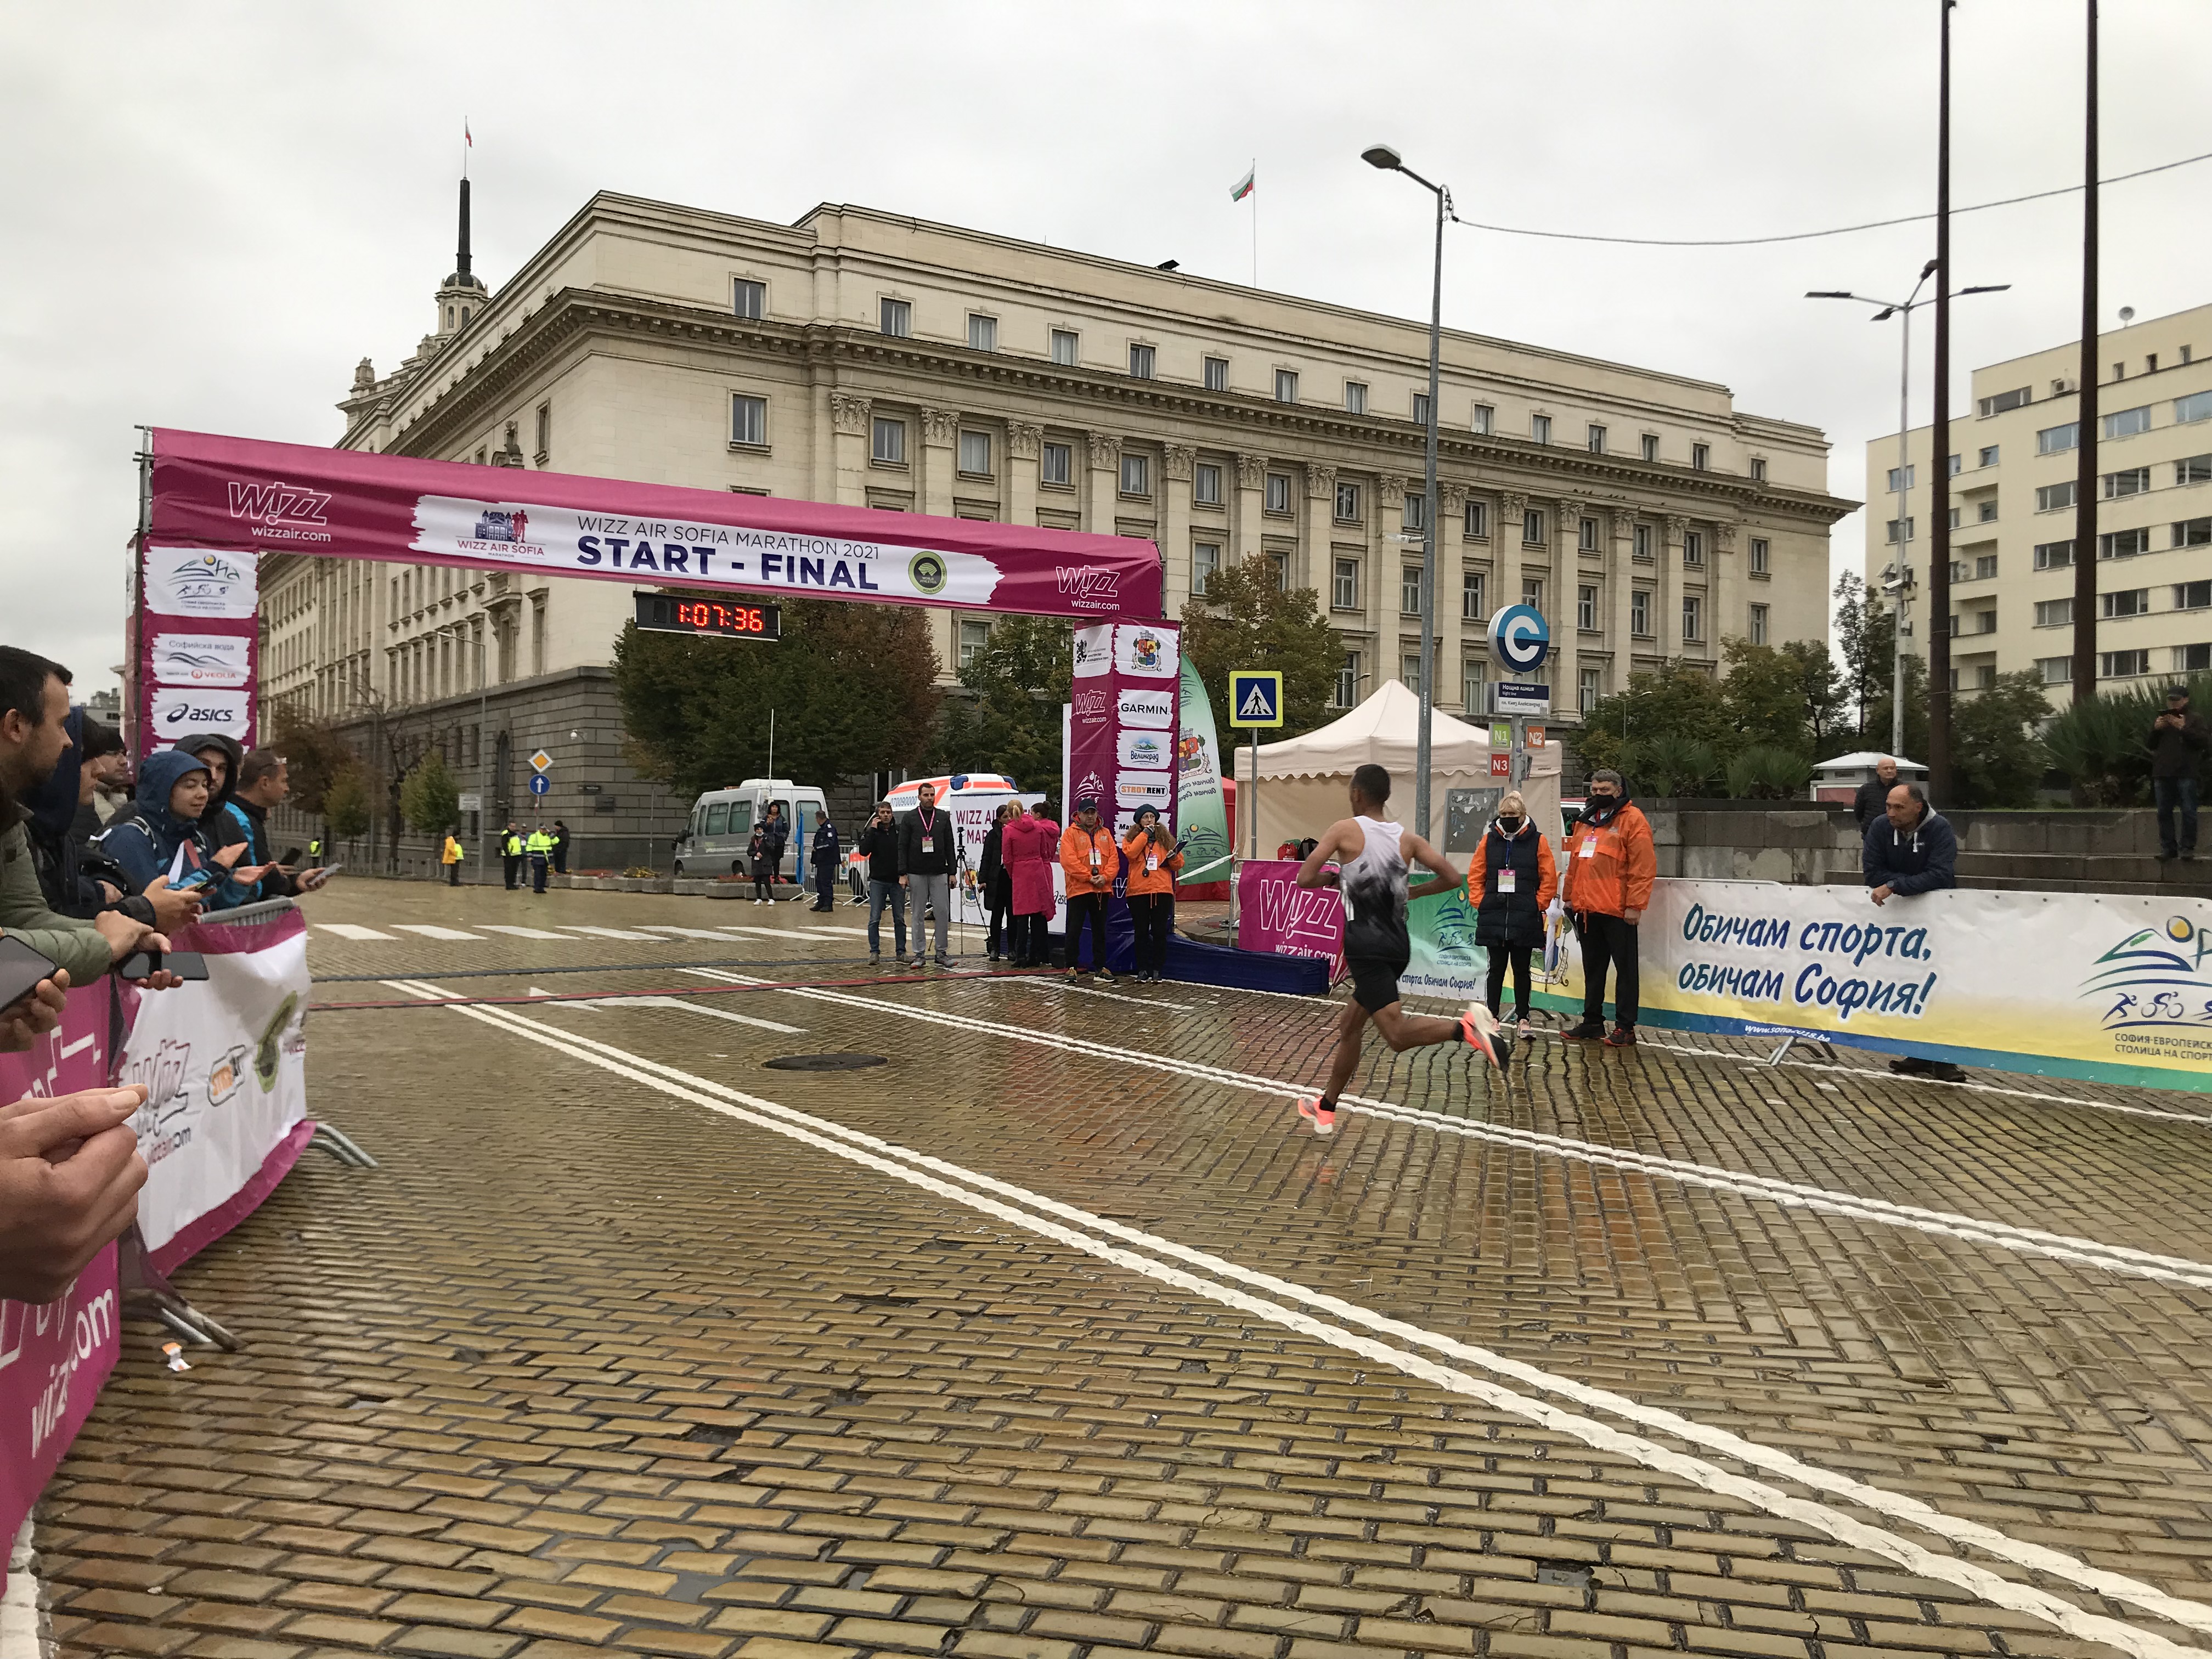 This year, too, Sofiyska Voda operated by Veolia, supported and participated in the Wizz Air Sofia Marathon